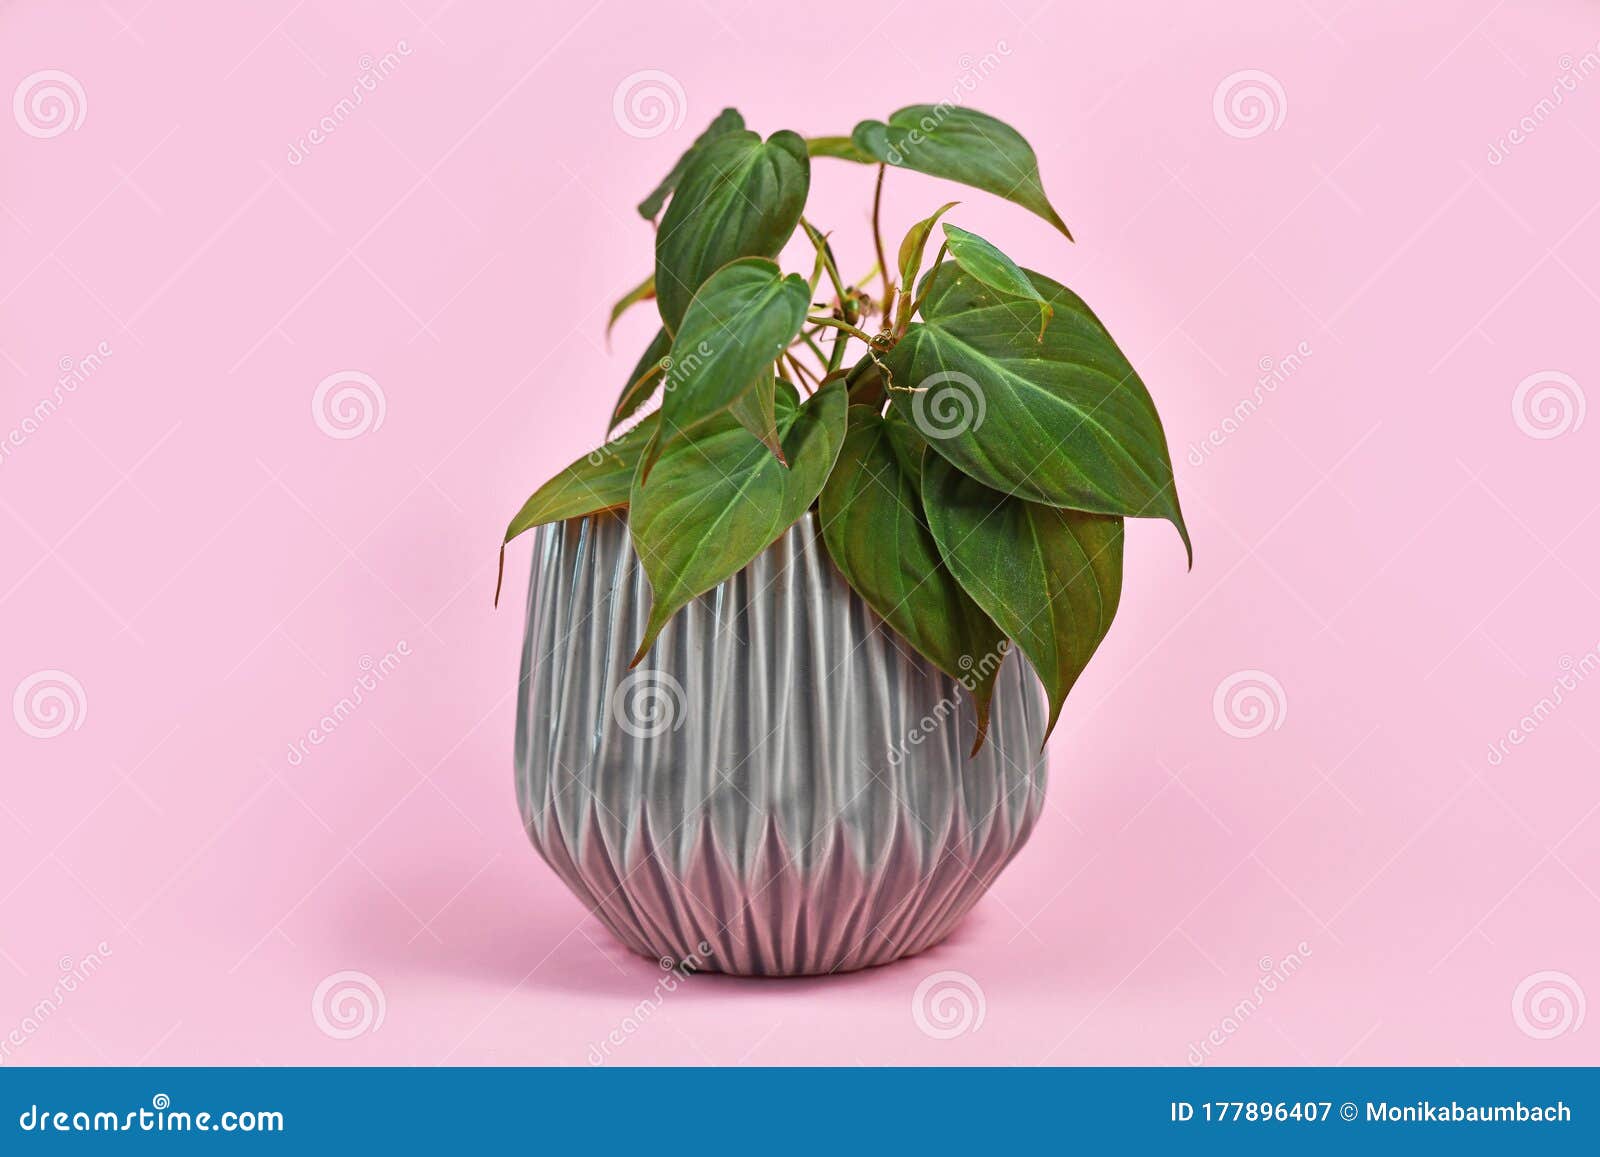 tropical `philodendron hederaceum micans` house plant with heart d leaves with velvet texture on pink background